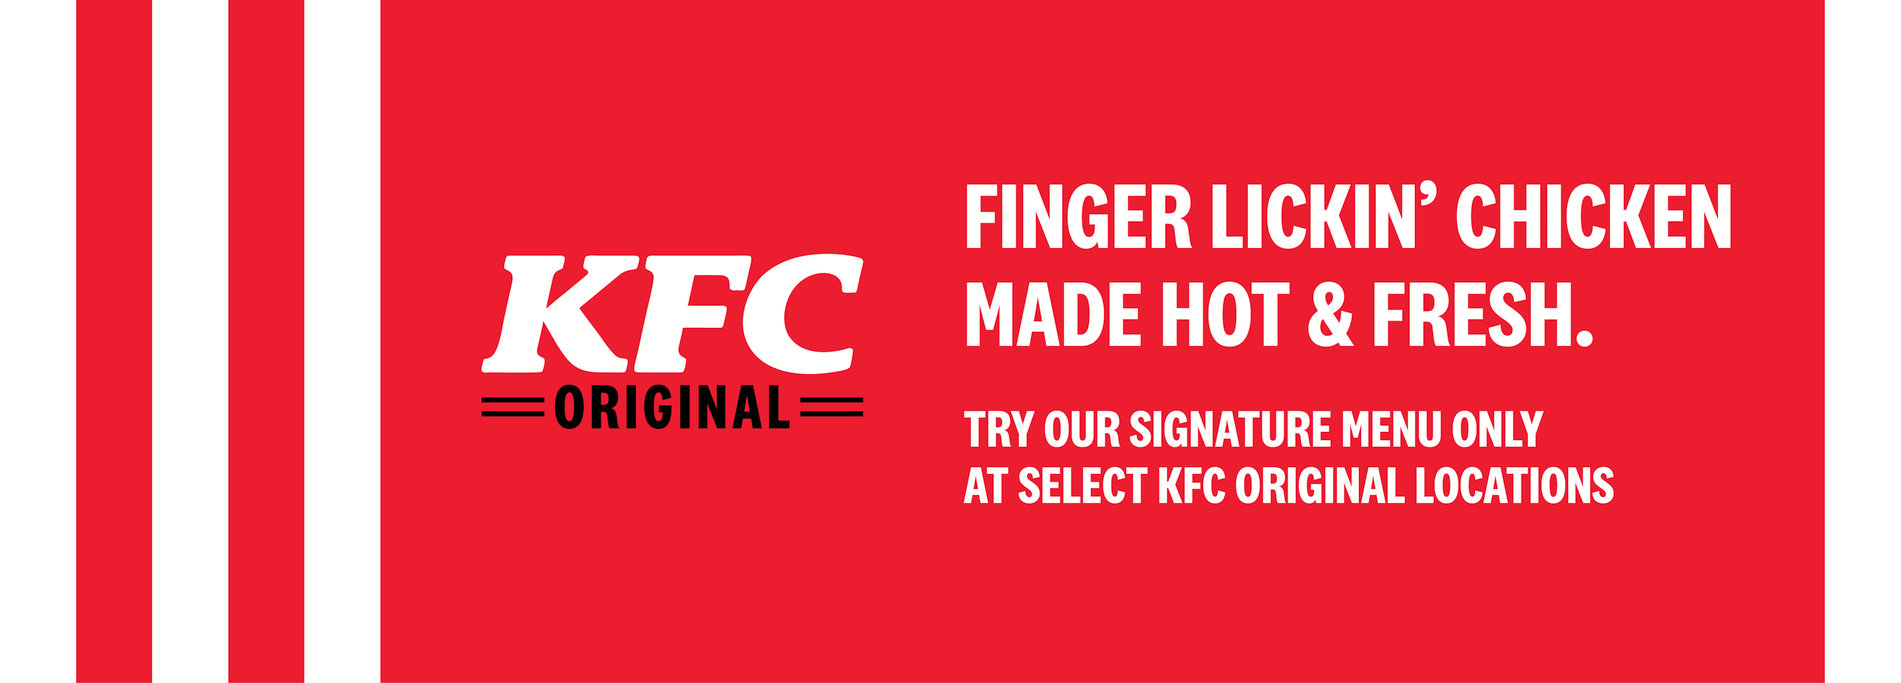 Graphic banner that includes the text, “KFC Original, Finger lickin’ chicken made hot & fresh. Try our signature menu only at select KFC Original locations”